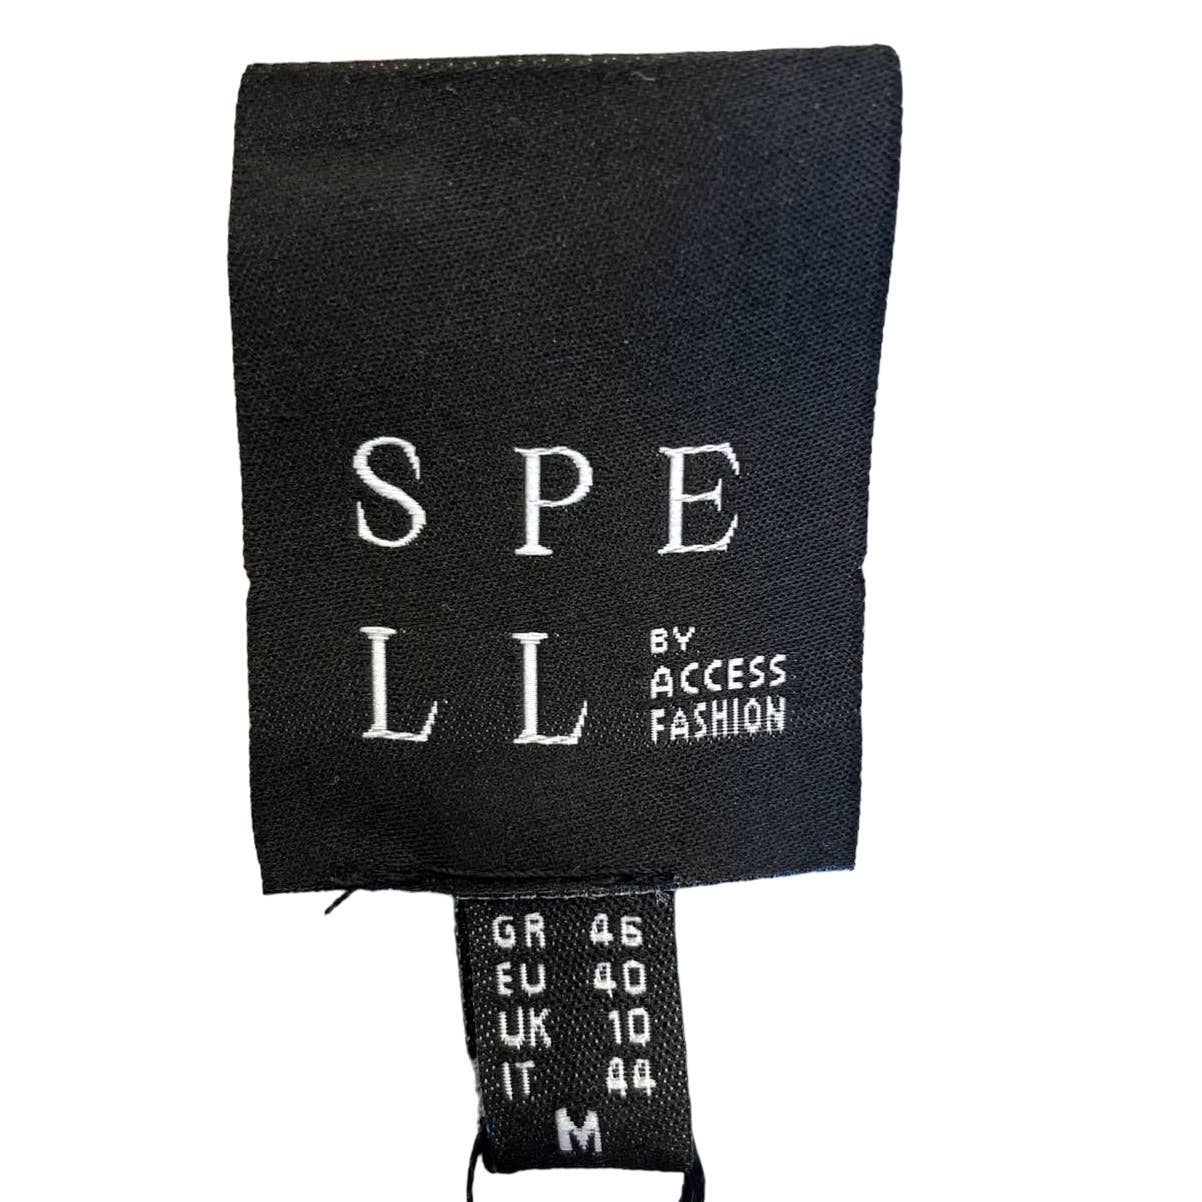 Spell by Access Fashion Top